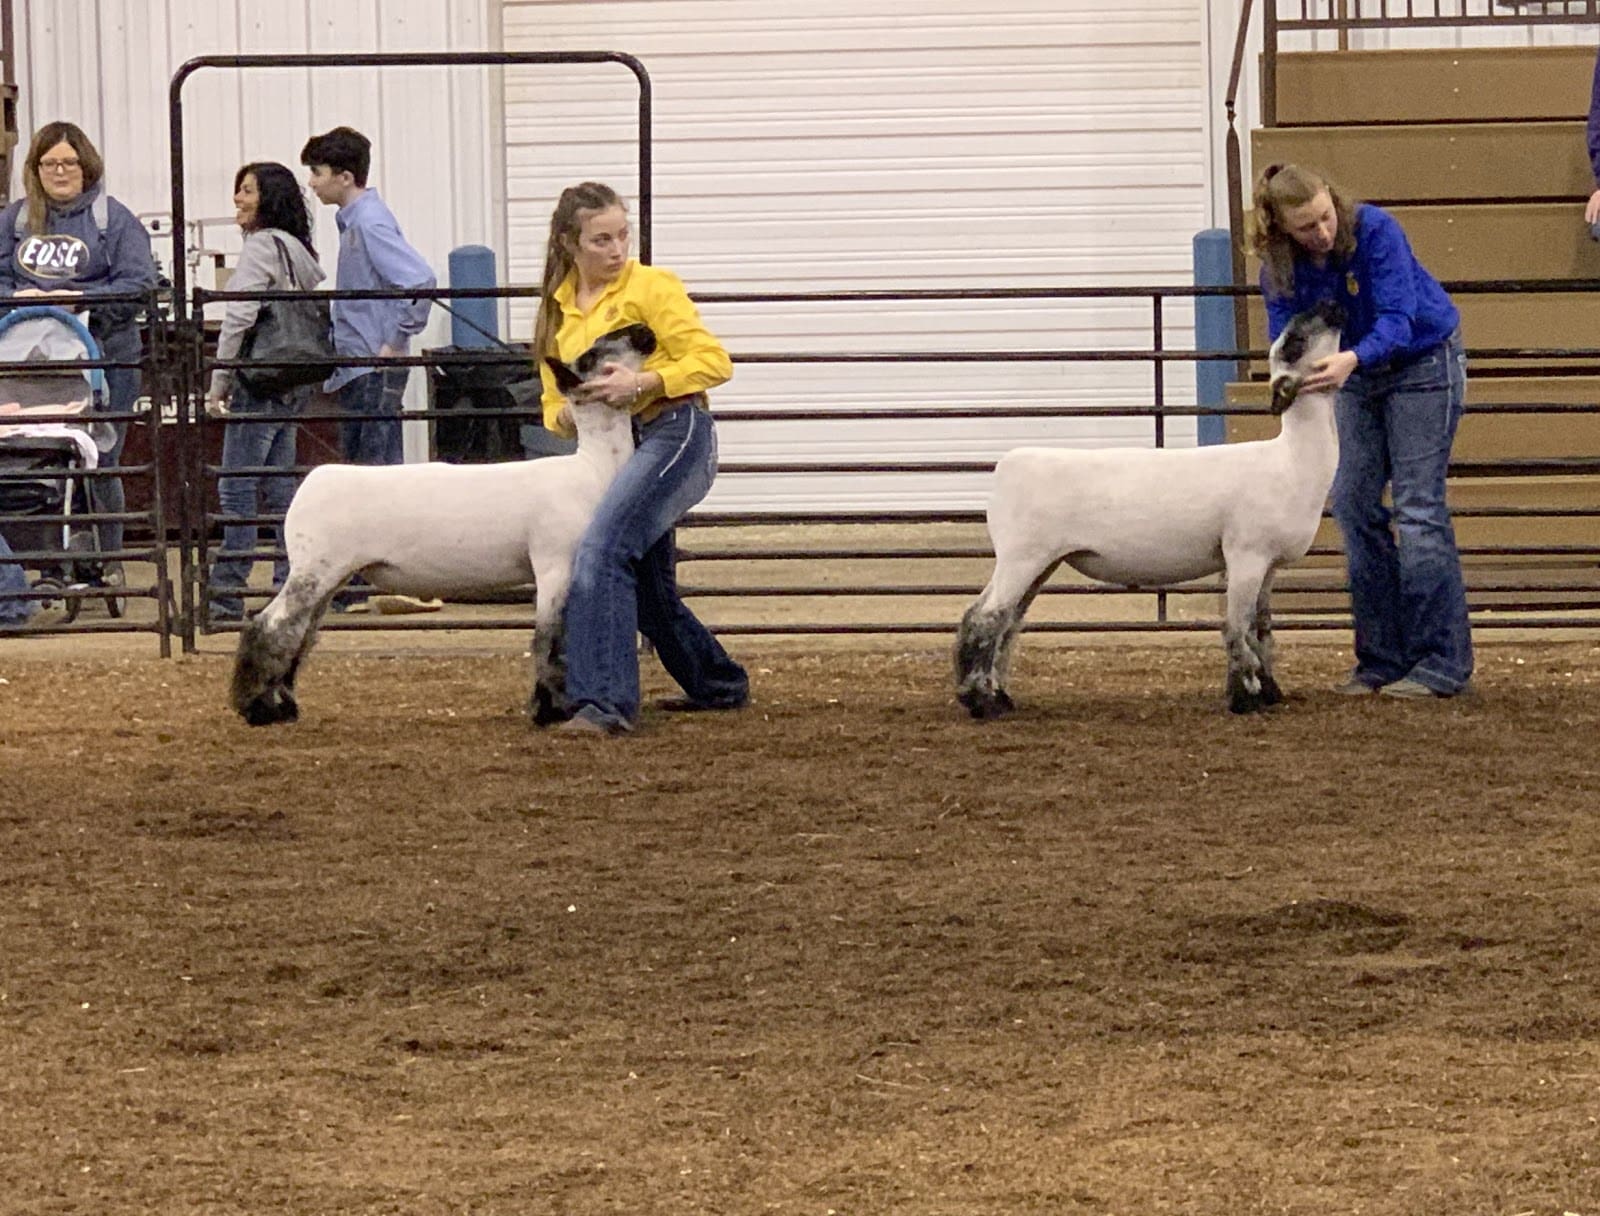 FFA SHOWS WELL AT KINGFISHER COUNTY LIVESTOCK SHOW